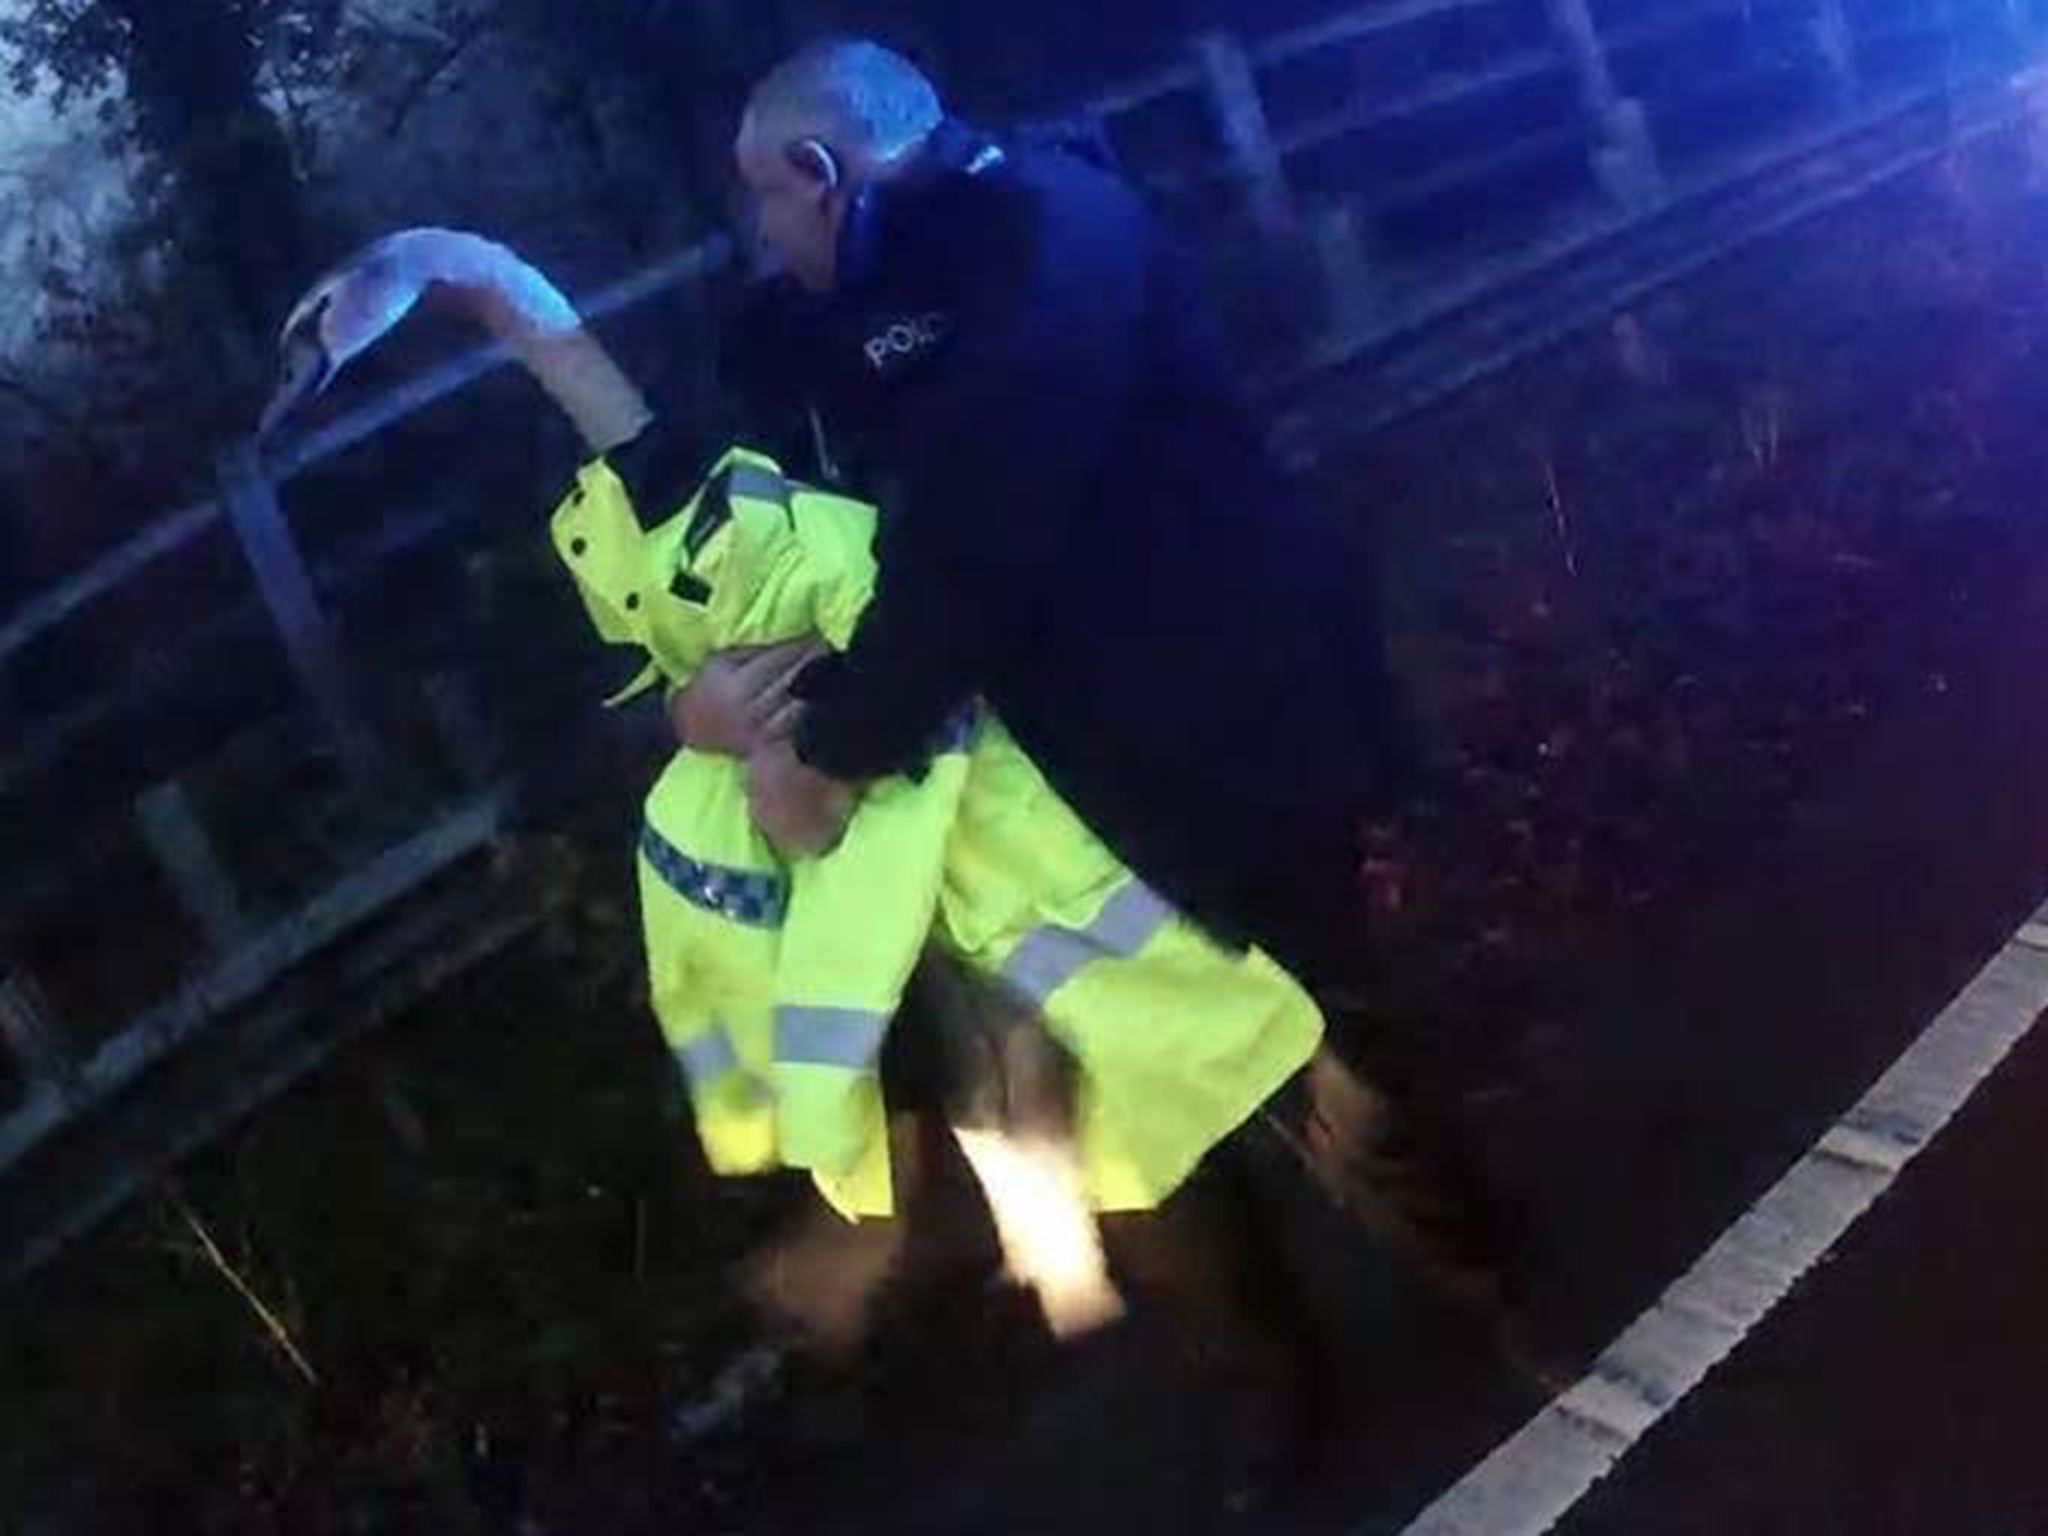 A swan was rescued by police in Basingstoke after it blocked a major road